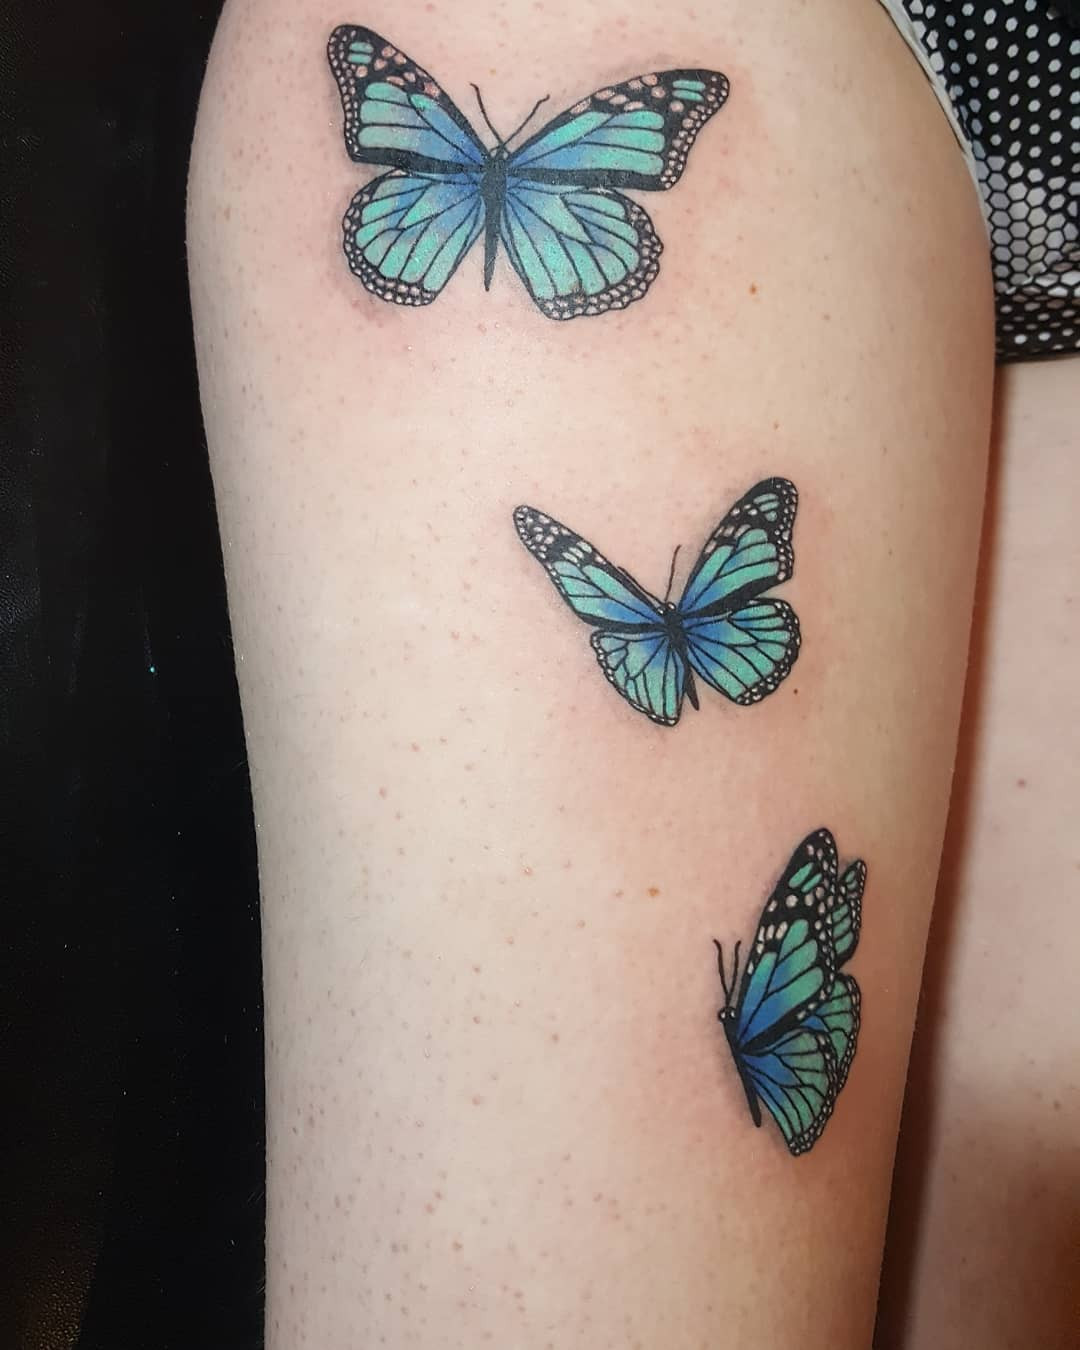 52 Sexiest Butterfly Tattoo Designs in 2020,